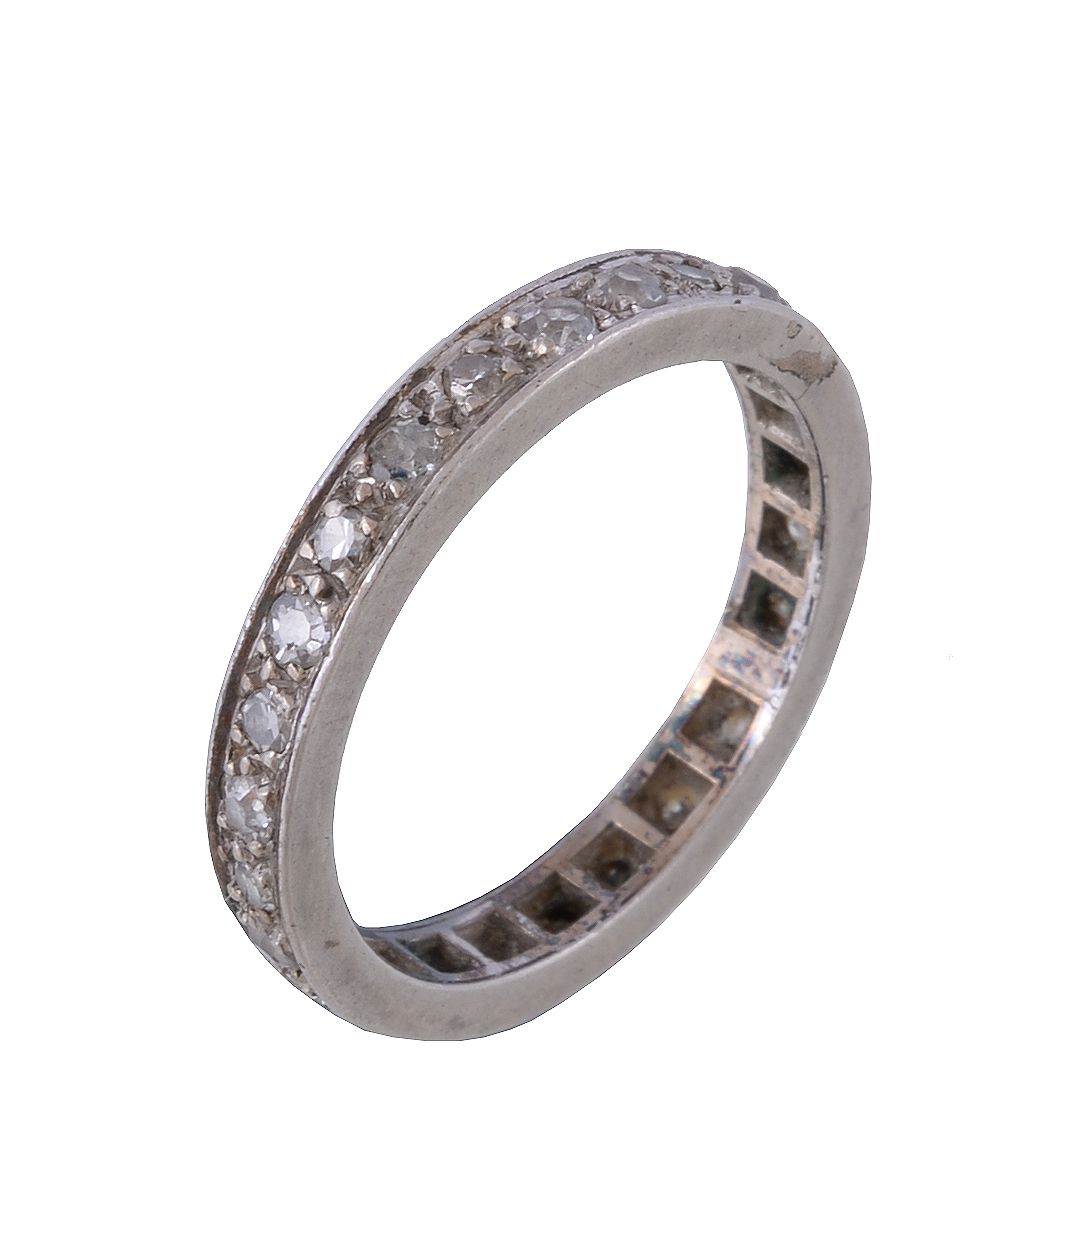 A diamond eternity ring, set with eight cut diamonds, approximately 0.37 carats total, finger size